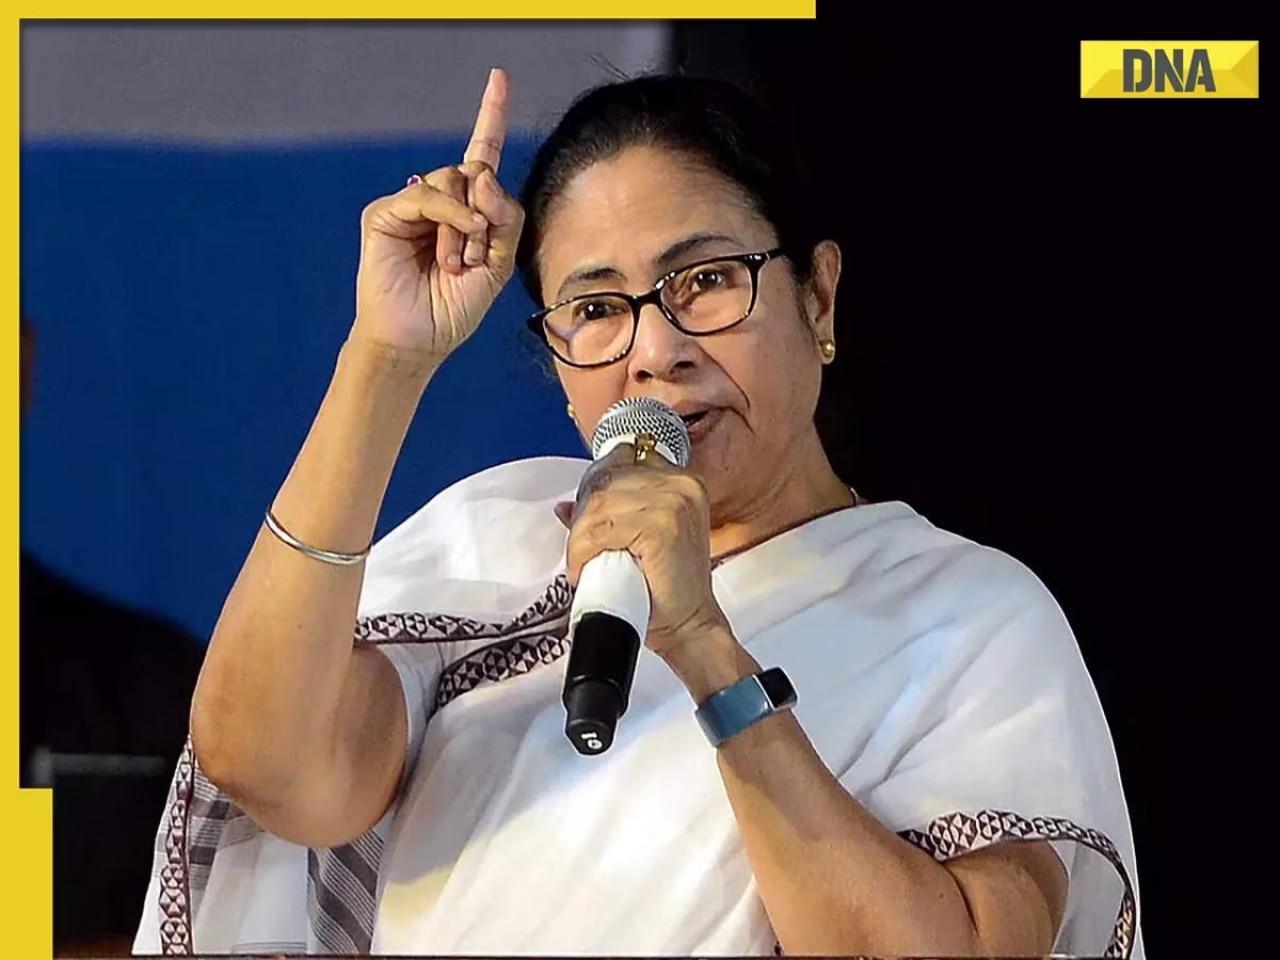 'Ready to shed blood...': West Bengal CM Mamata Banerjee says she won't accept CAA, NRC, UCC at Eid gathering